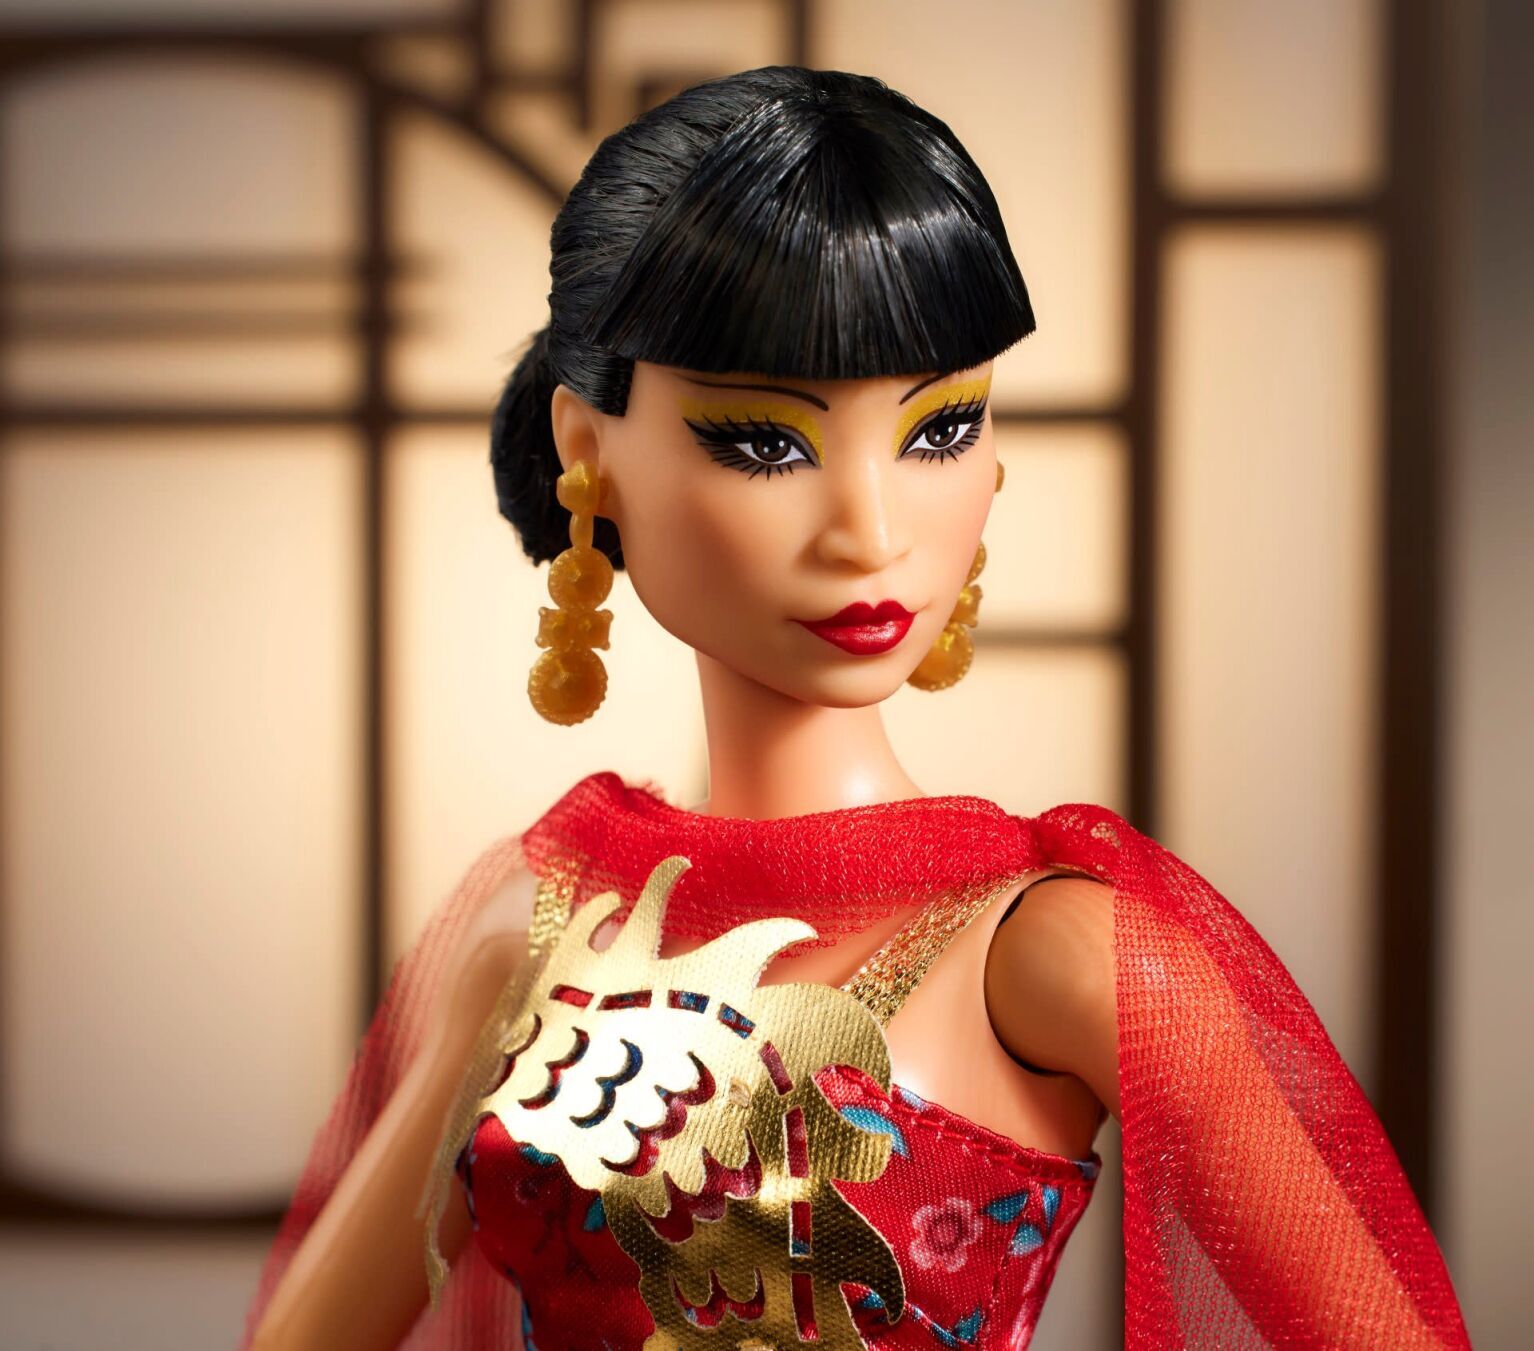 In Case You Missed It: Barbie Honors Hollywood Trailblazer Anna Mae Wong